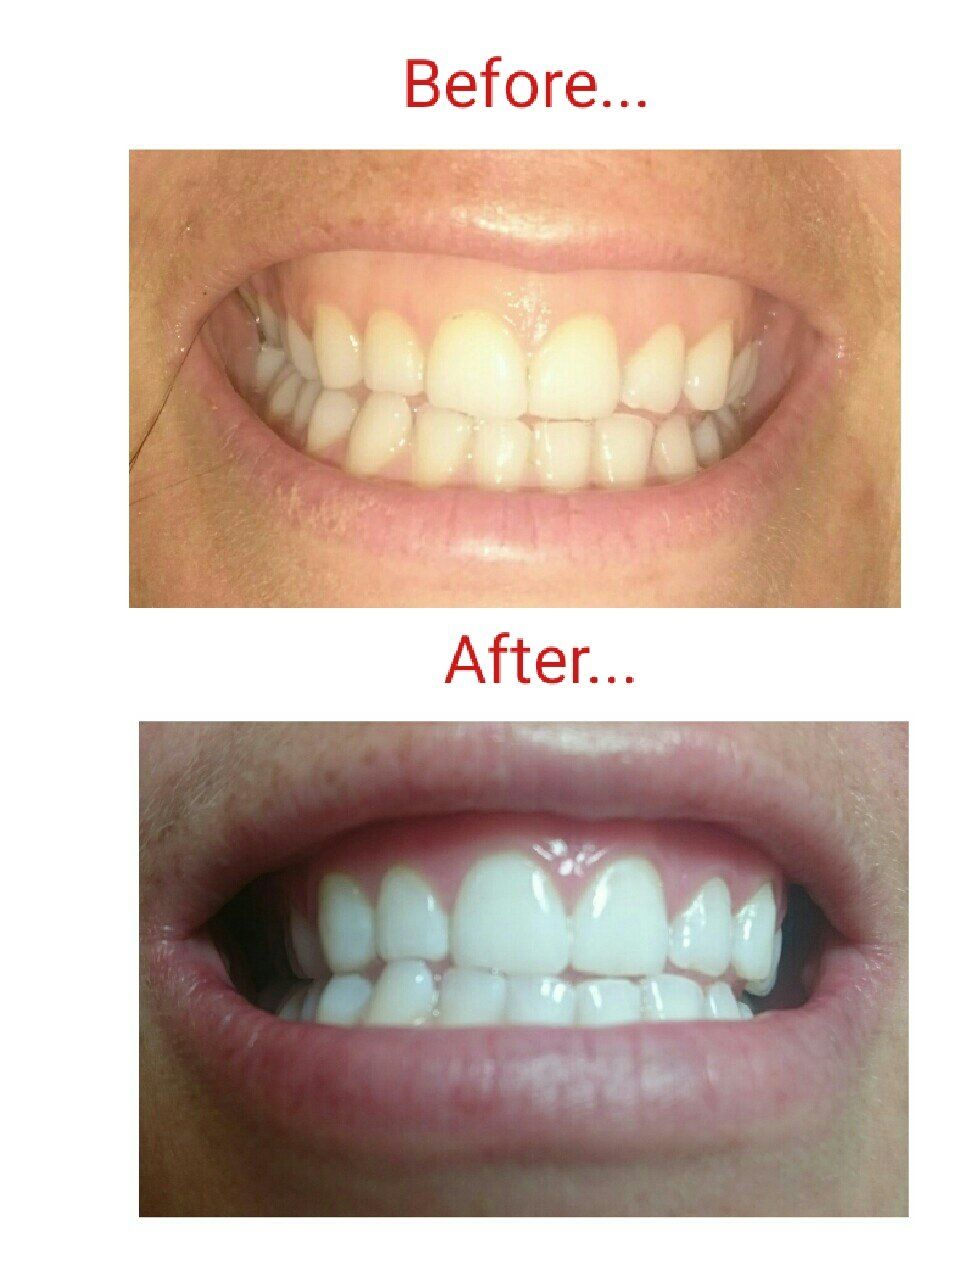 10 shades lighter before and after teeth whitening